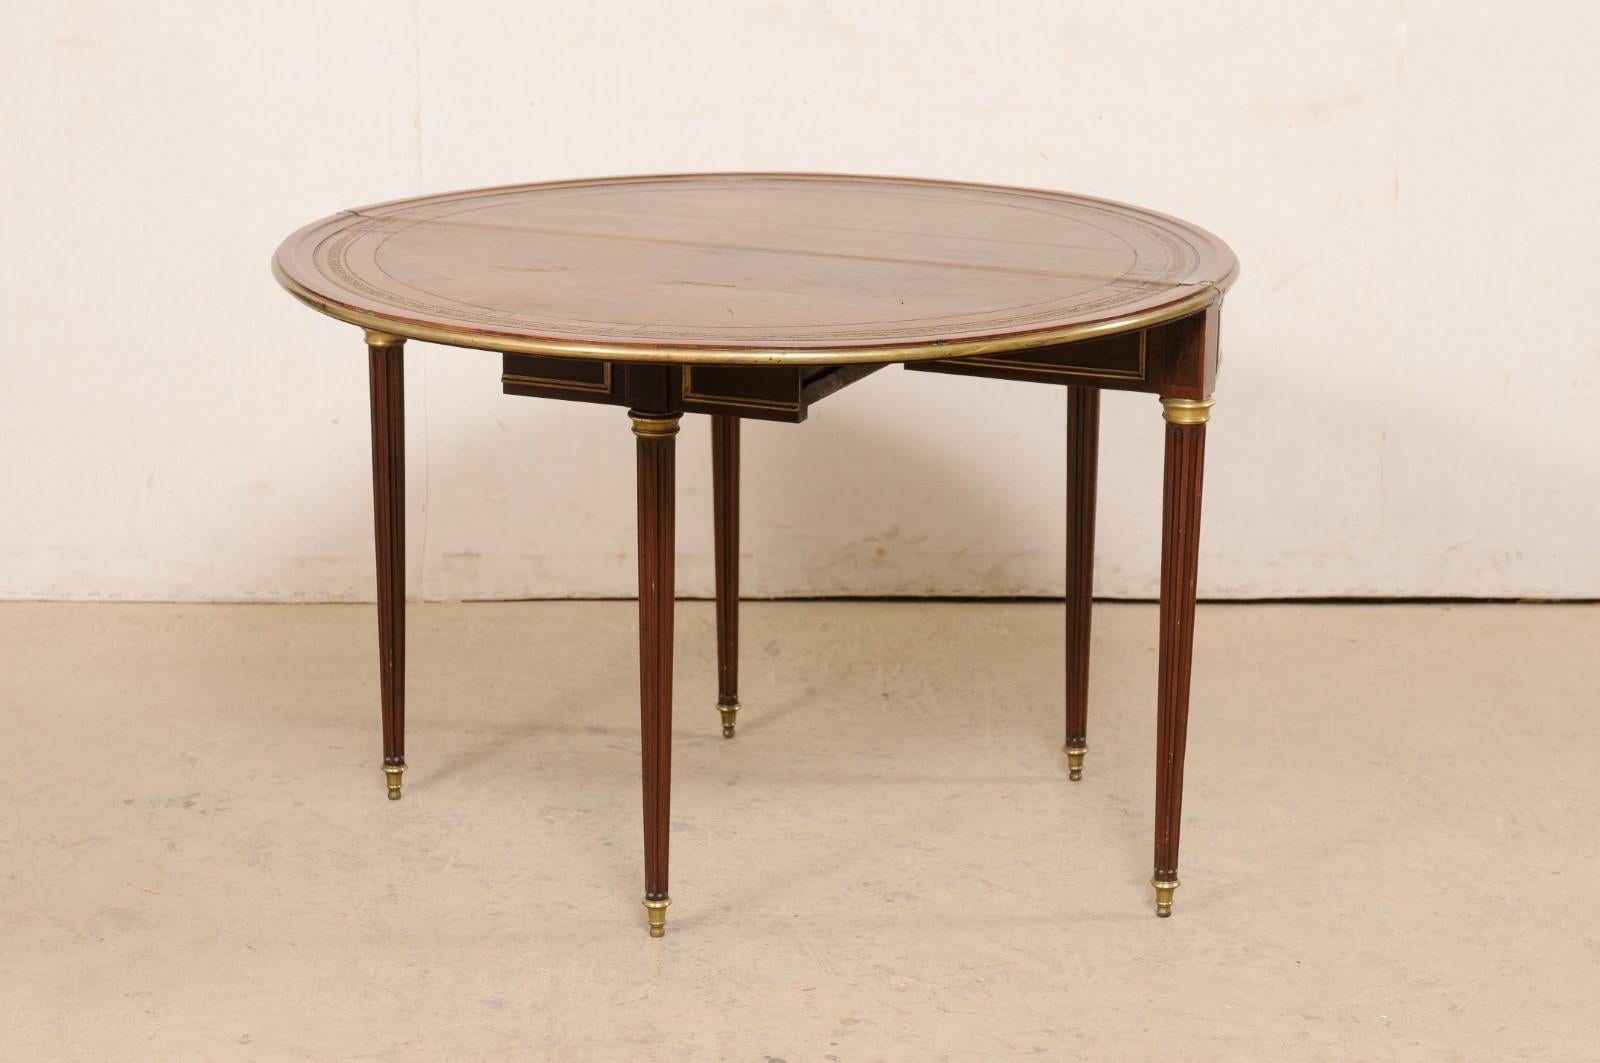  Elegant French Neoclassical Demi-to-round Table W/ Brass Accents, 19th C.  For Sale 7